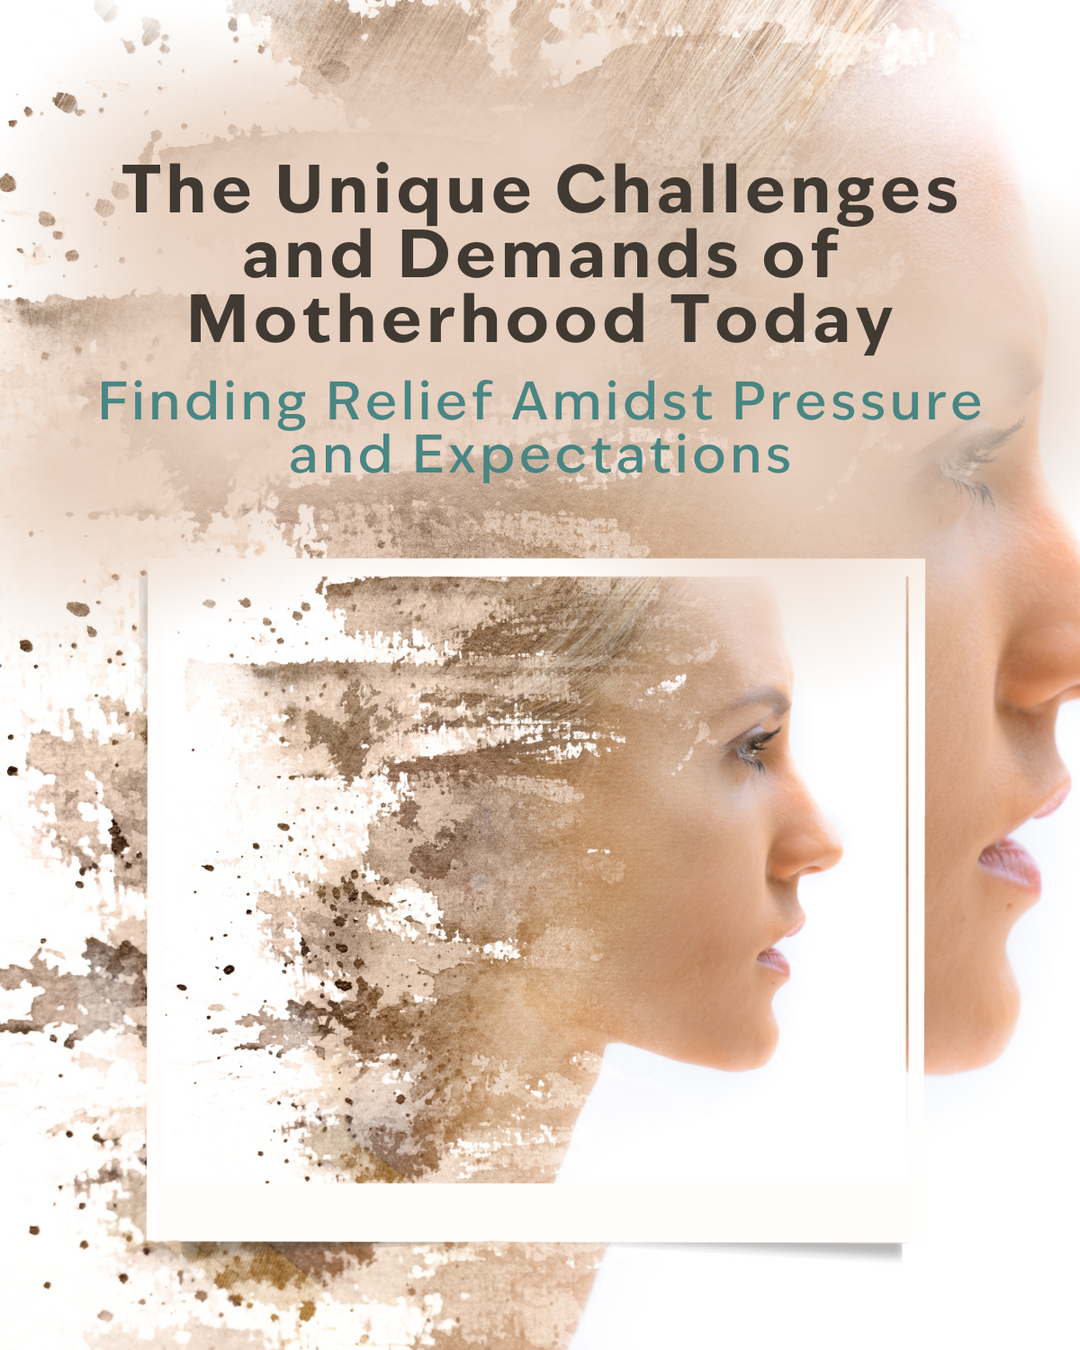 The Unique Challenges and Demands of Motherhood Today: Finding Help and Relief Amidst Pressure and Expectations